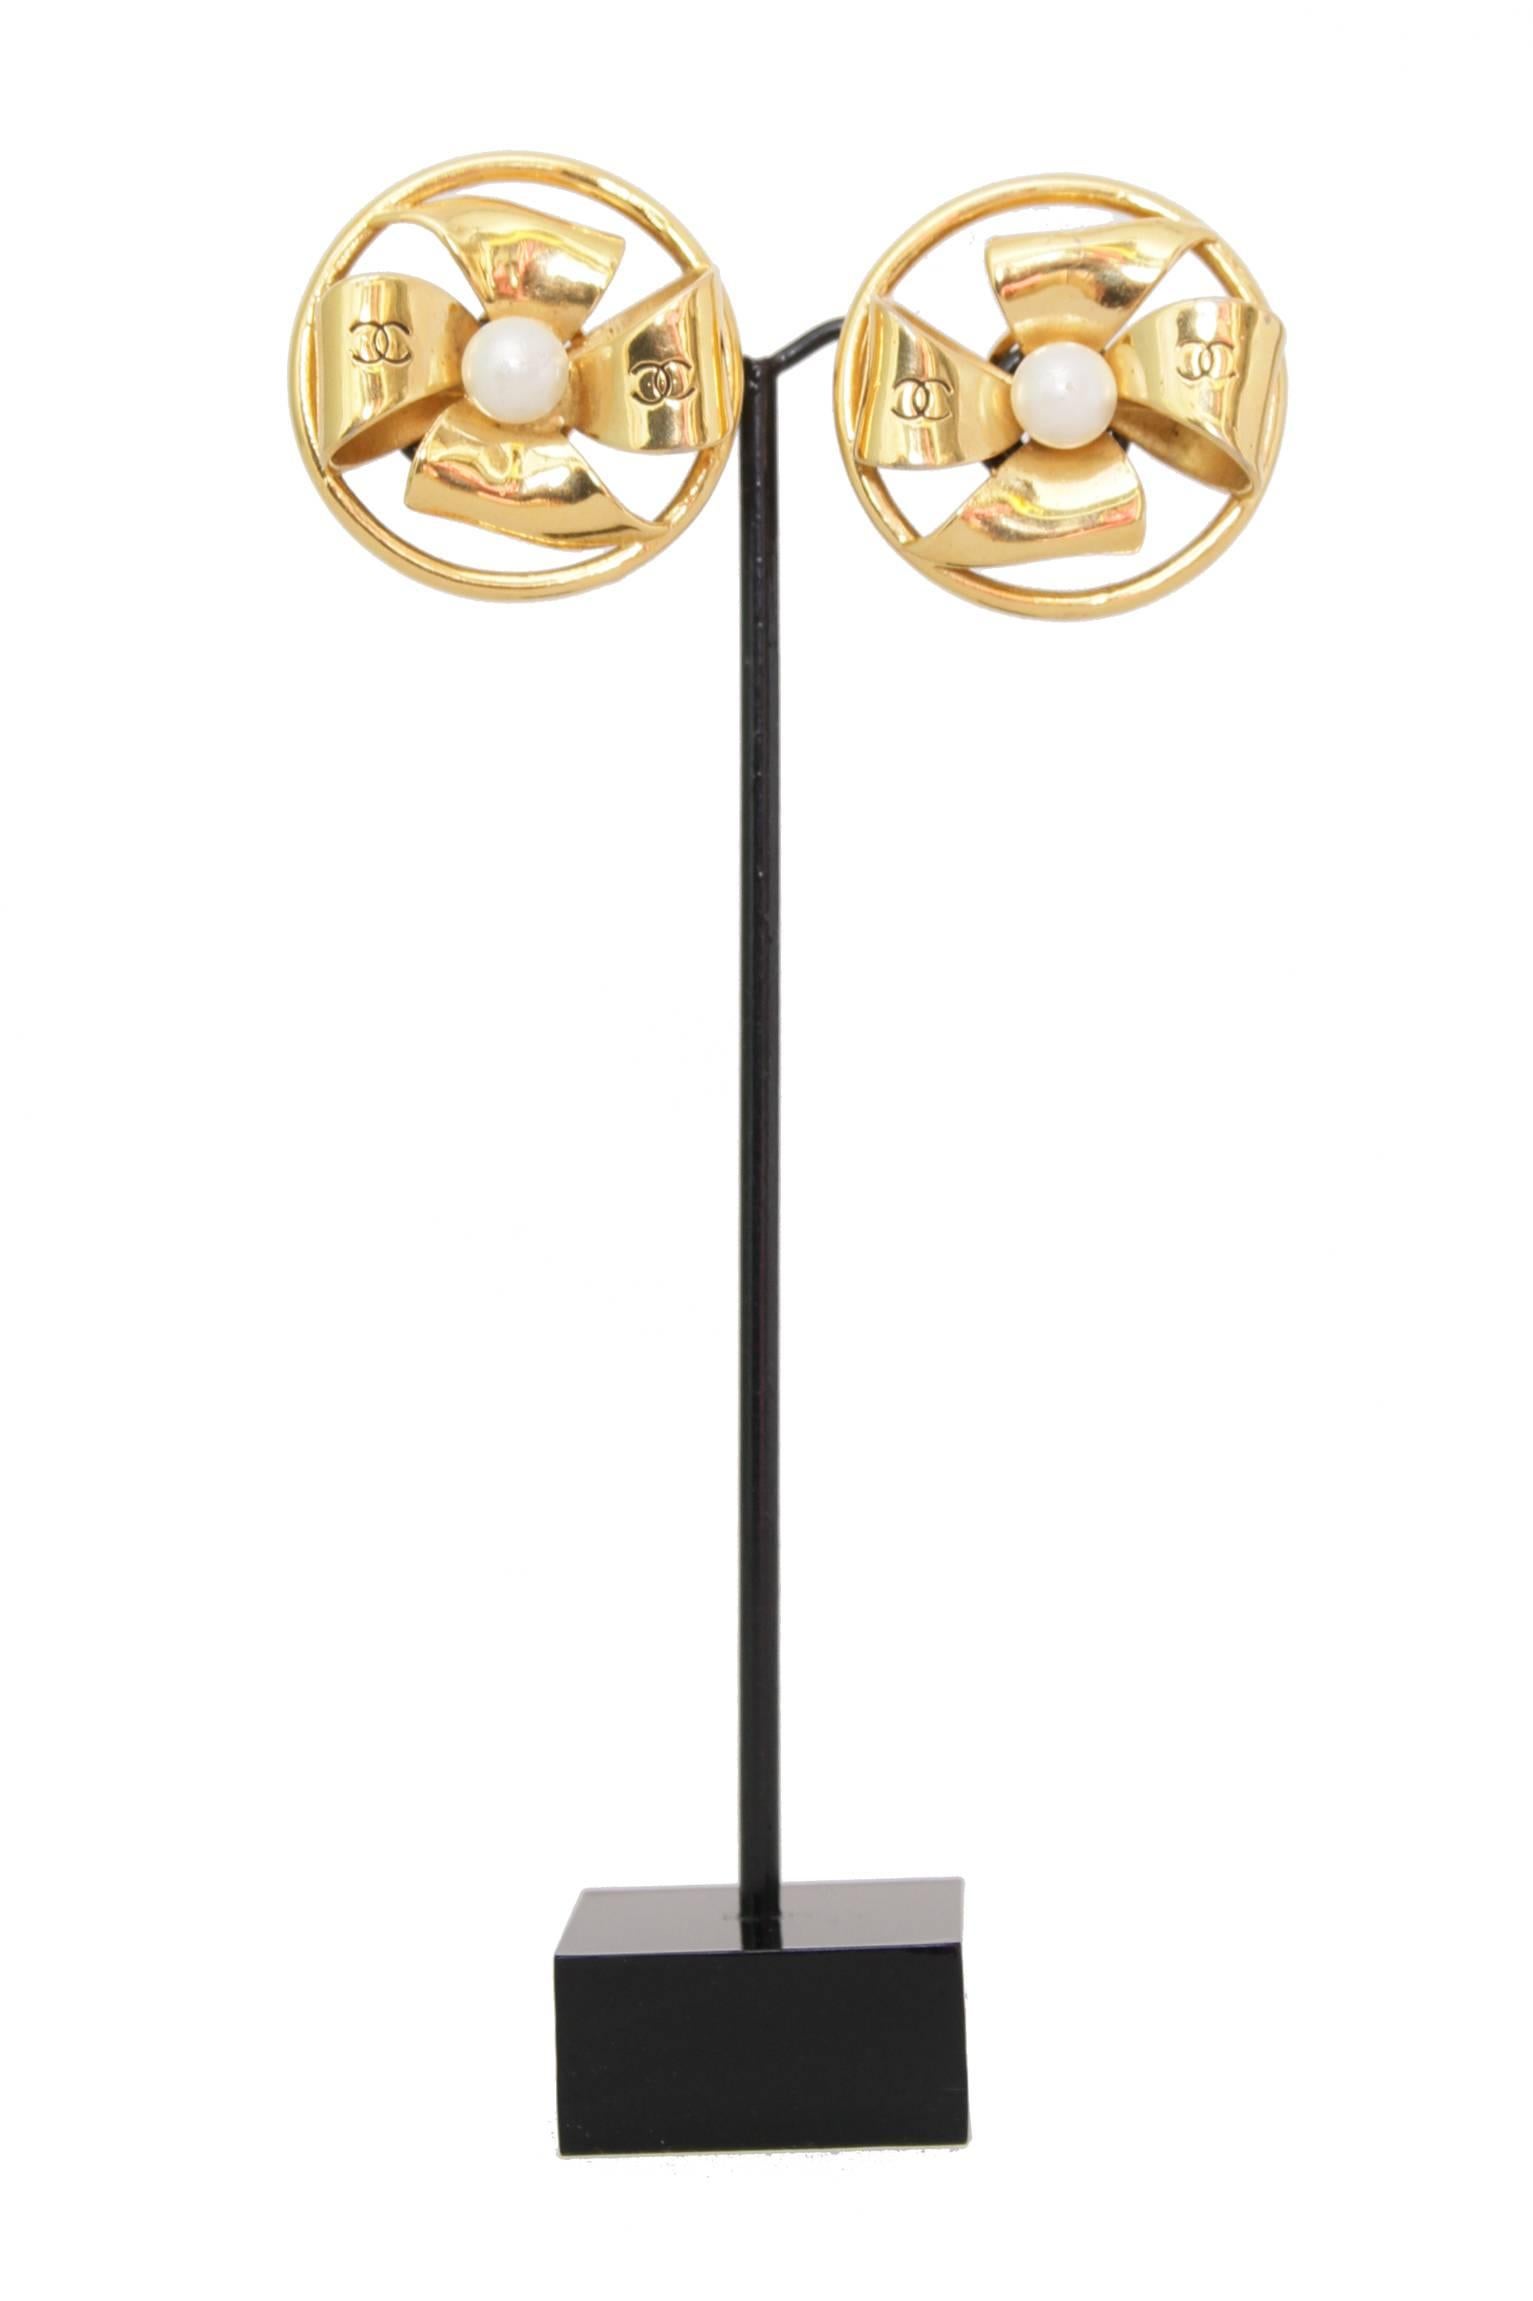 A pair of 1980s large gold toned Chanel clip-on earrings shaped as a bow set in a round gold wire. A Chanel double 'C' logo is engraved on each side of the bow encasing a mother of pearl center. 

The earrings are stamped: Chanel. 